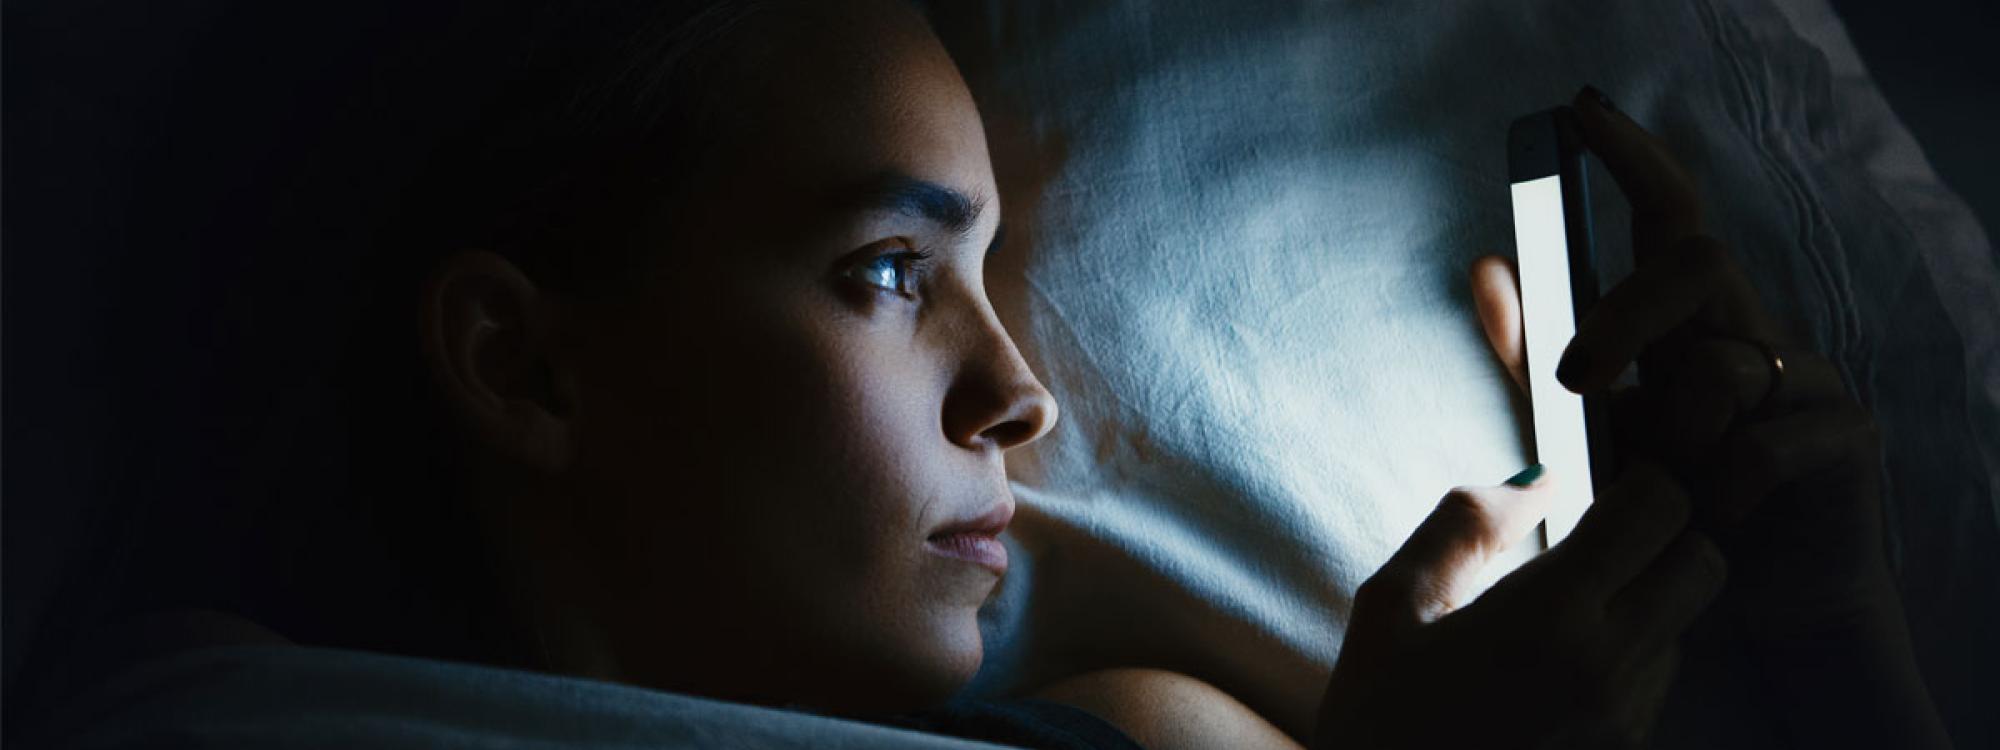 Woman laying in bed in darkness, looking at illuminated phone screen